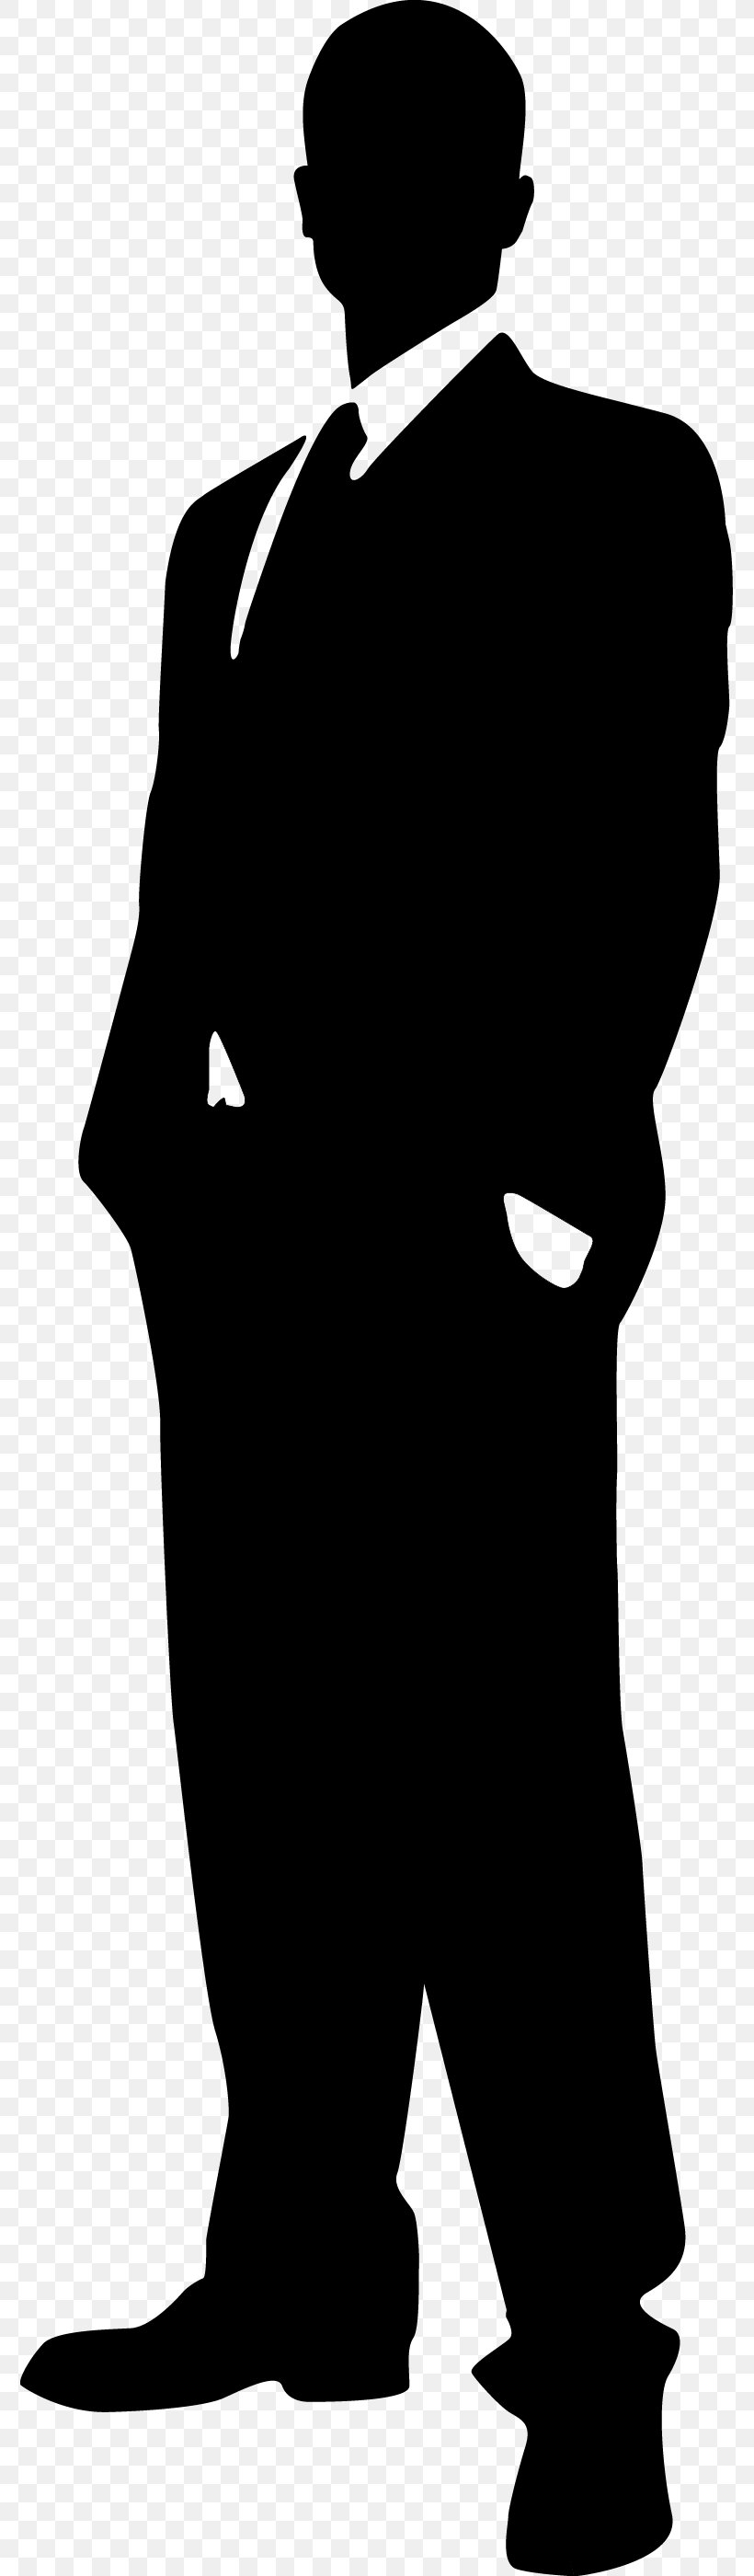 Silhouette Person Clip Art, PNG, 775x2800px, Silhouette, Art, Black, Black And White, Drawing Download Free